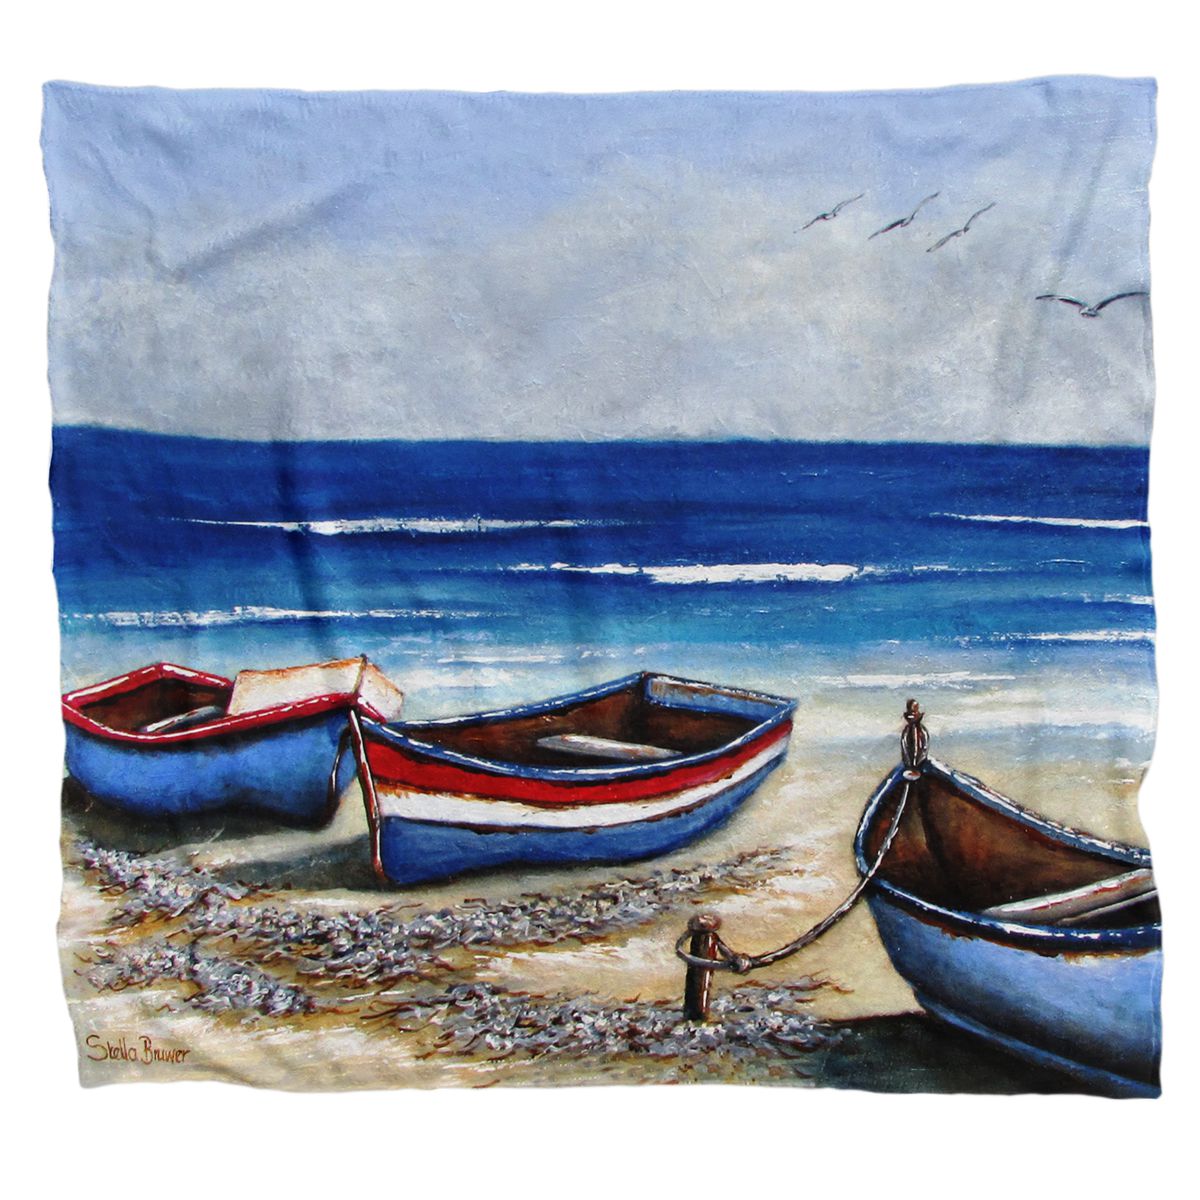 3 Boats on the Shore Light Weight Fleece Blanket By Stella Bruwer